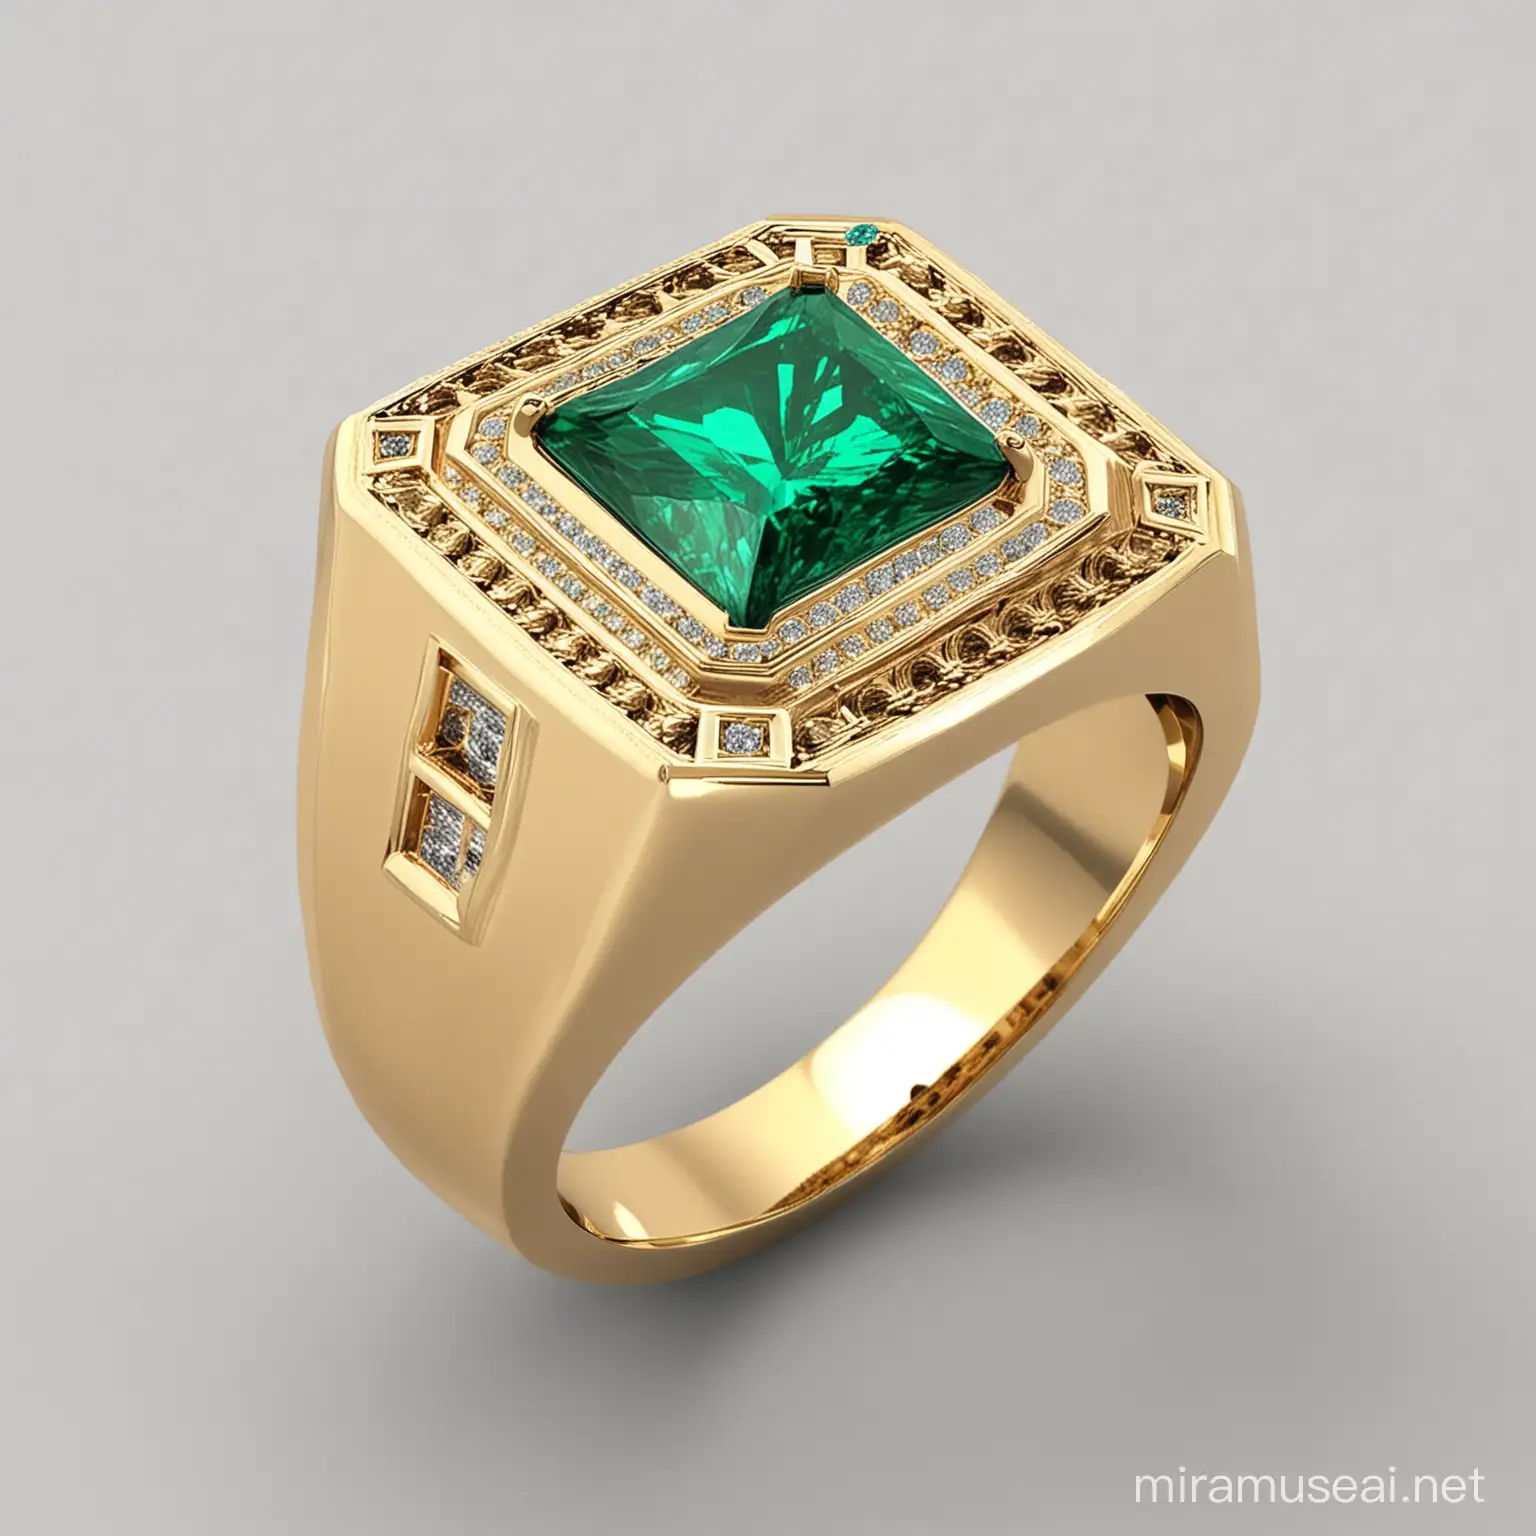 Mens Gold Ring with Square Emerald Design